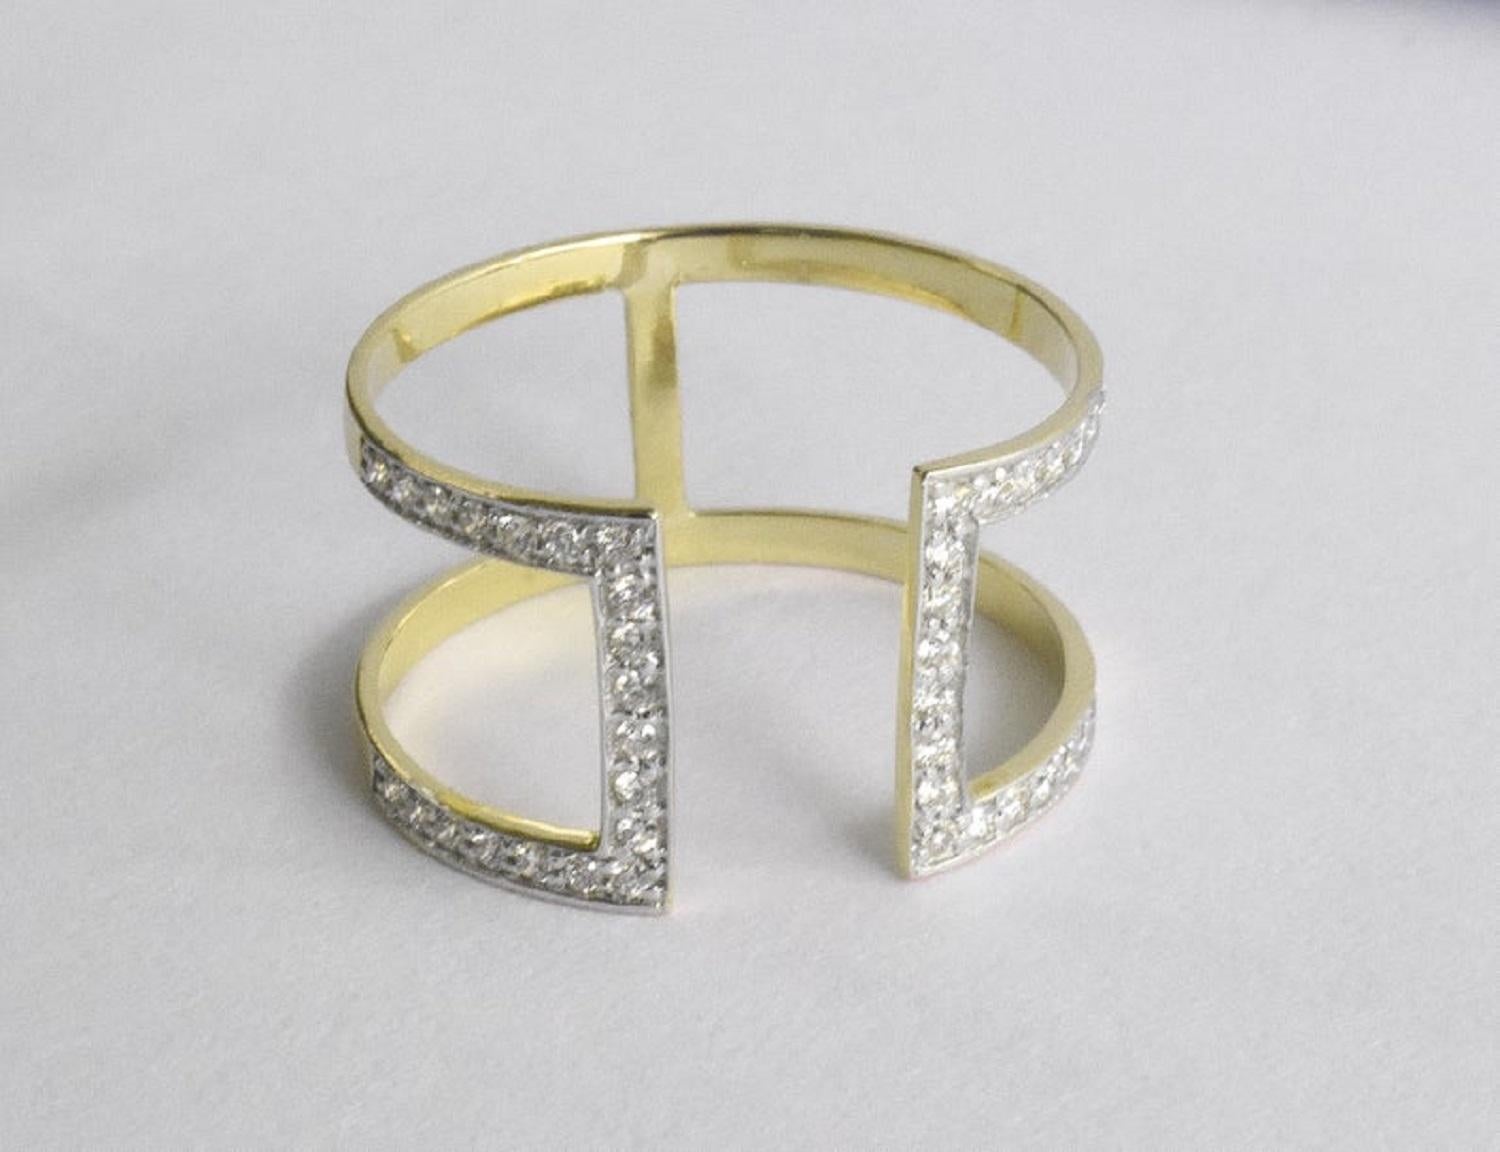 For Sale:  18k Gold Double Row Diamond Ring Two Band Ring Parallel Open Bar Diamond 3